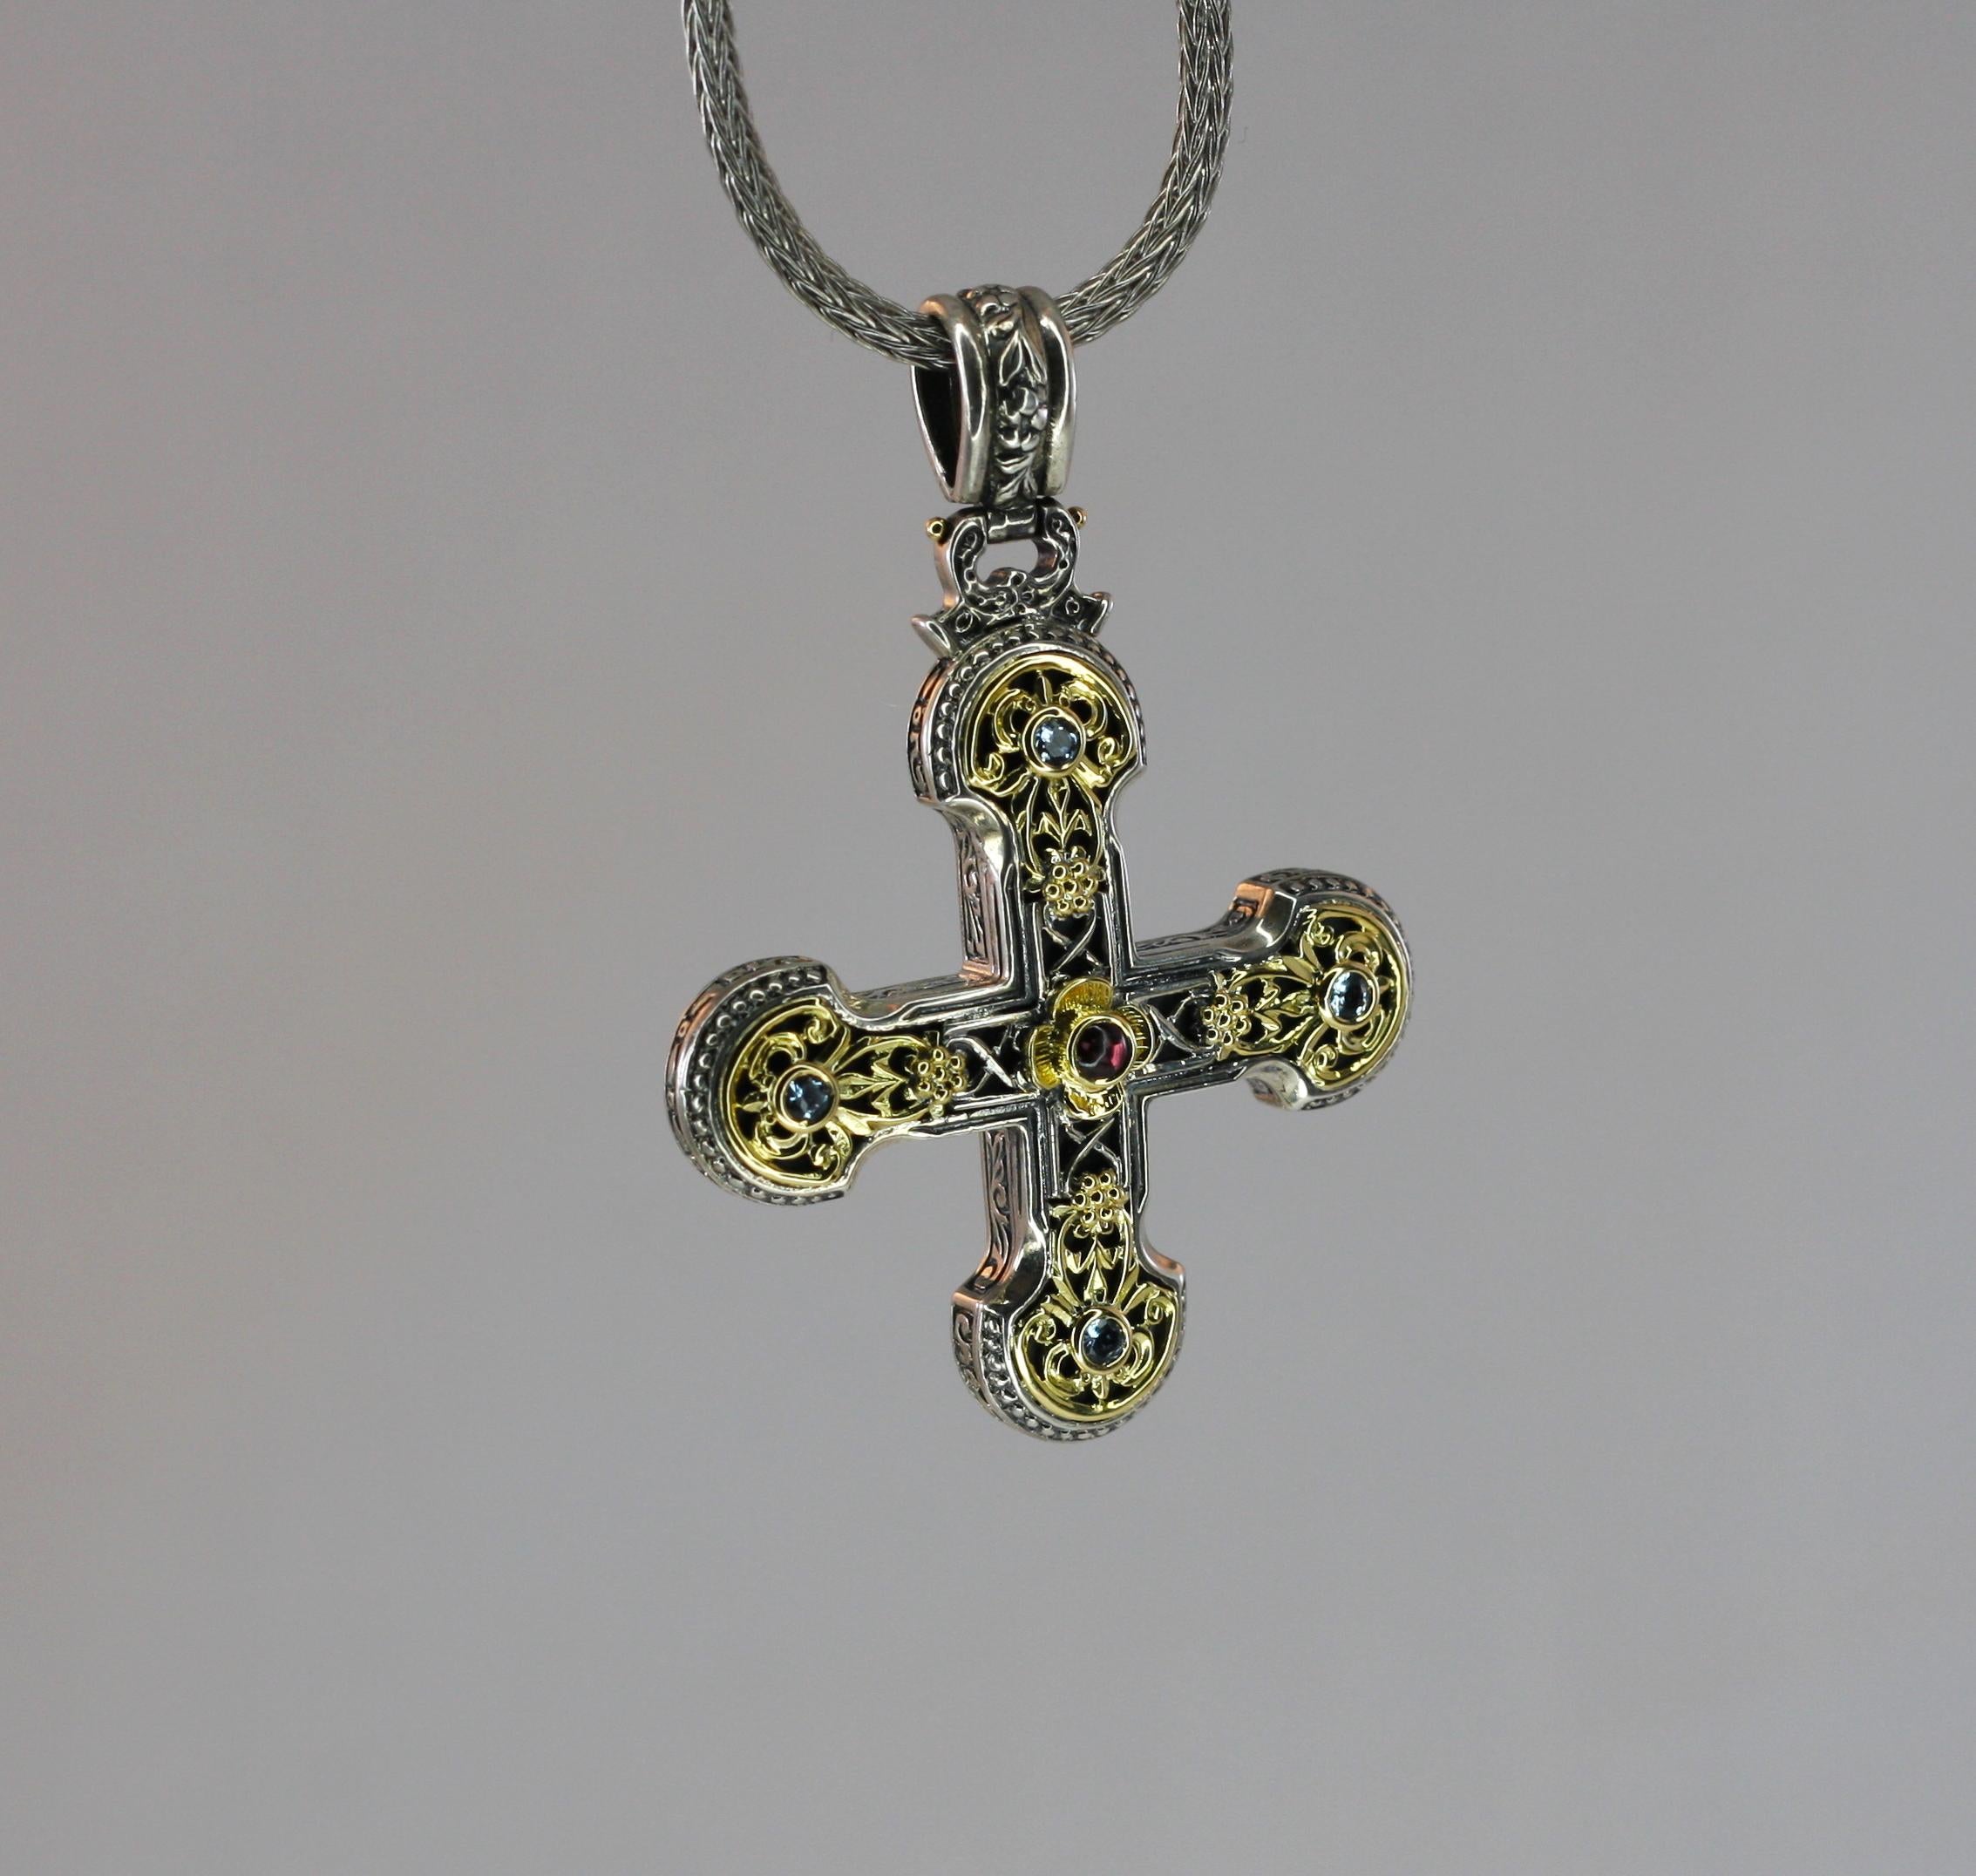 Presenting all handmade heavy decorated Cross pendant crafted from sterling silver and solid 18 Karat yellow gold inlay to create a unique look. This enhancer features 1.21 Carat Tourmaline and 0.60 Carat Topaz in total. Cross has a wide hook to be